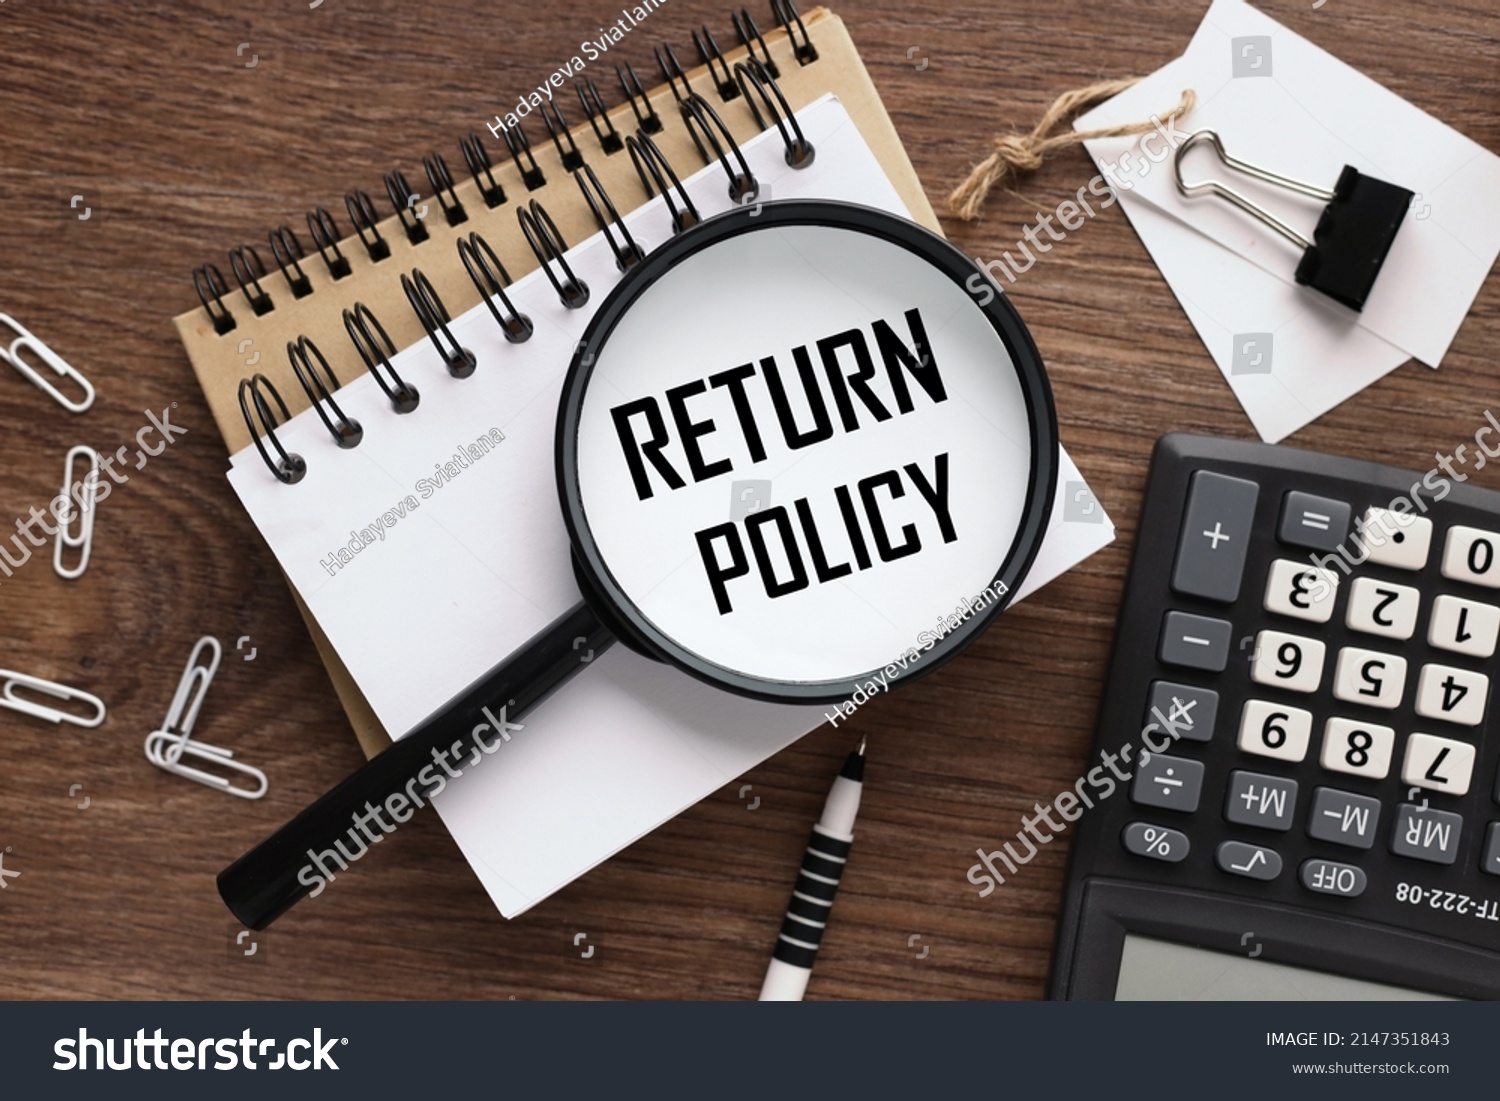 RETURN POLICY magnifying glass on a beautiful notepad. text on magnifying glass #2147351843